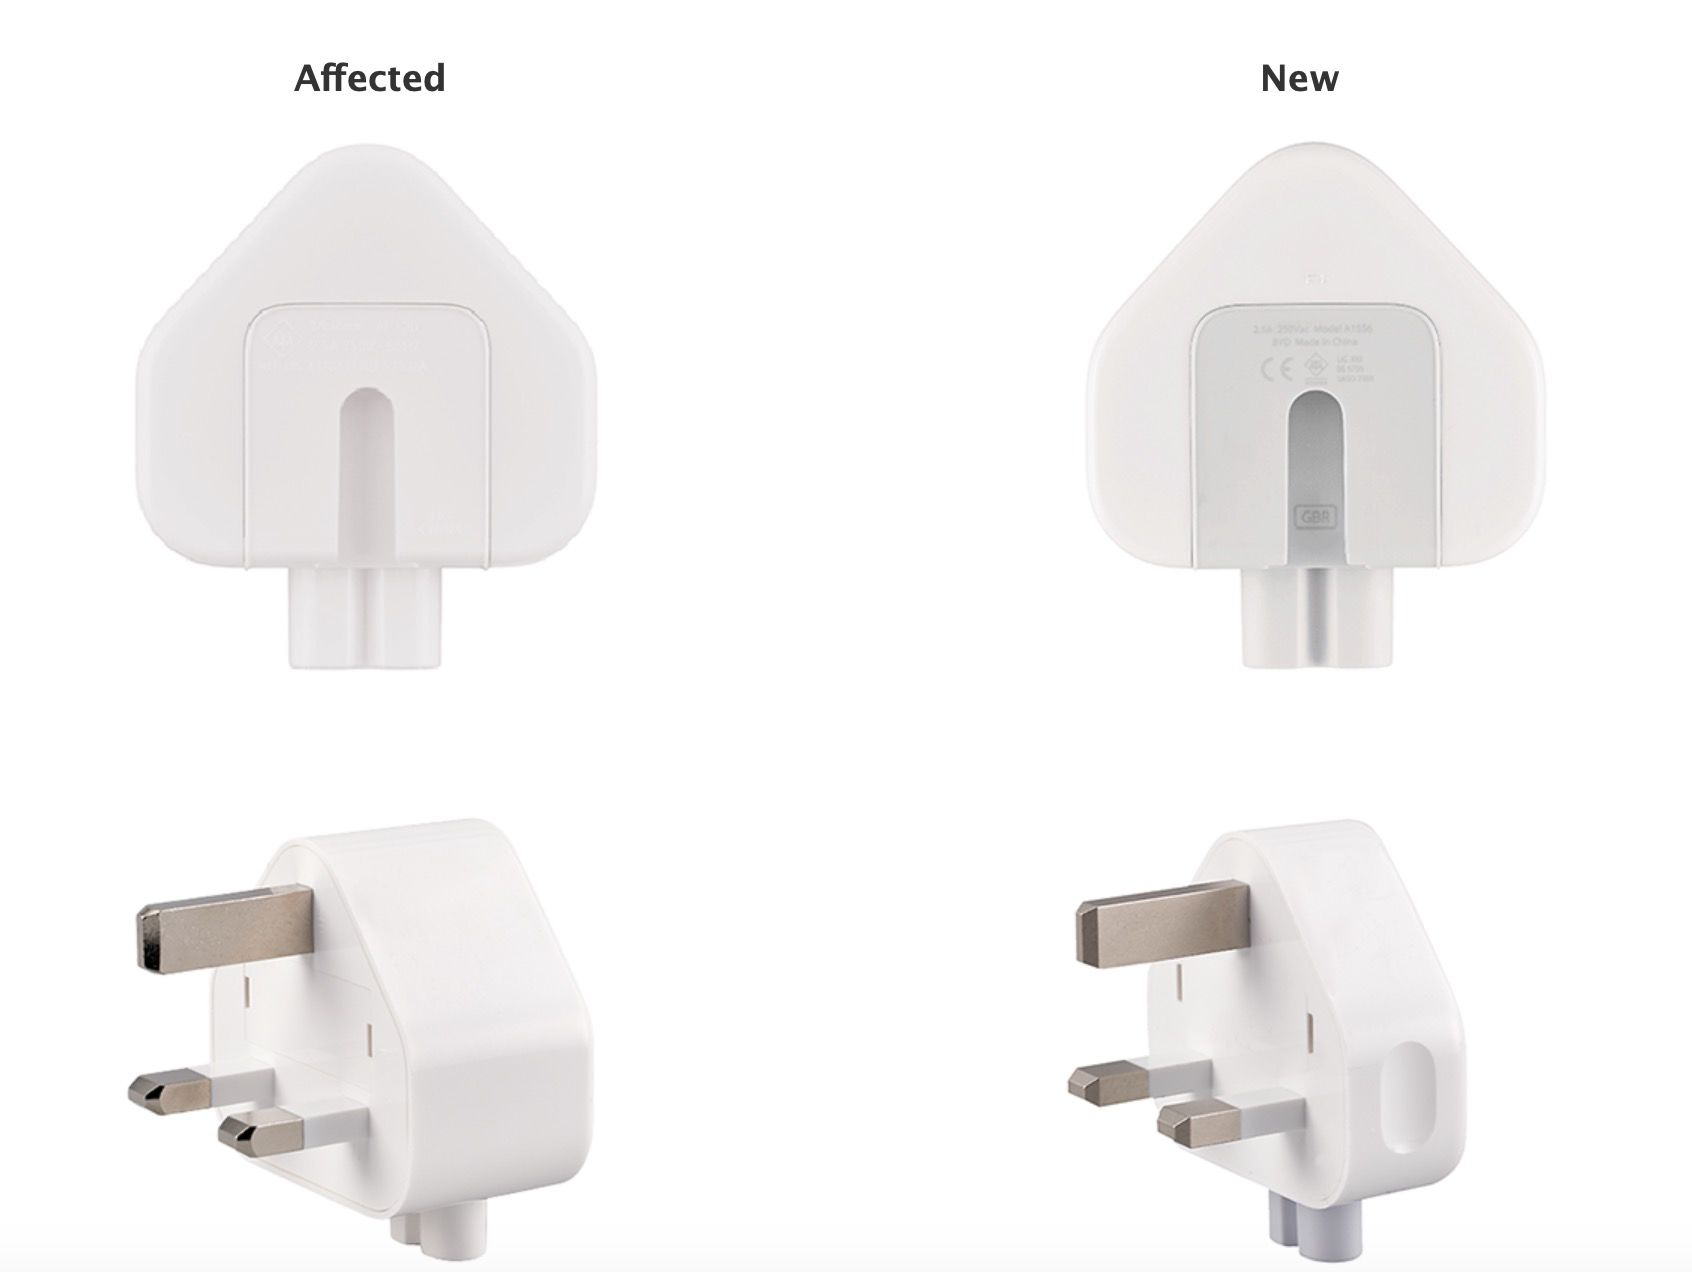 Apple Recall Wall Plugs over safety fears